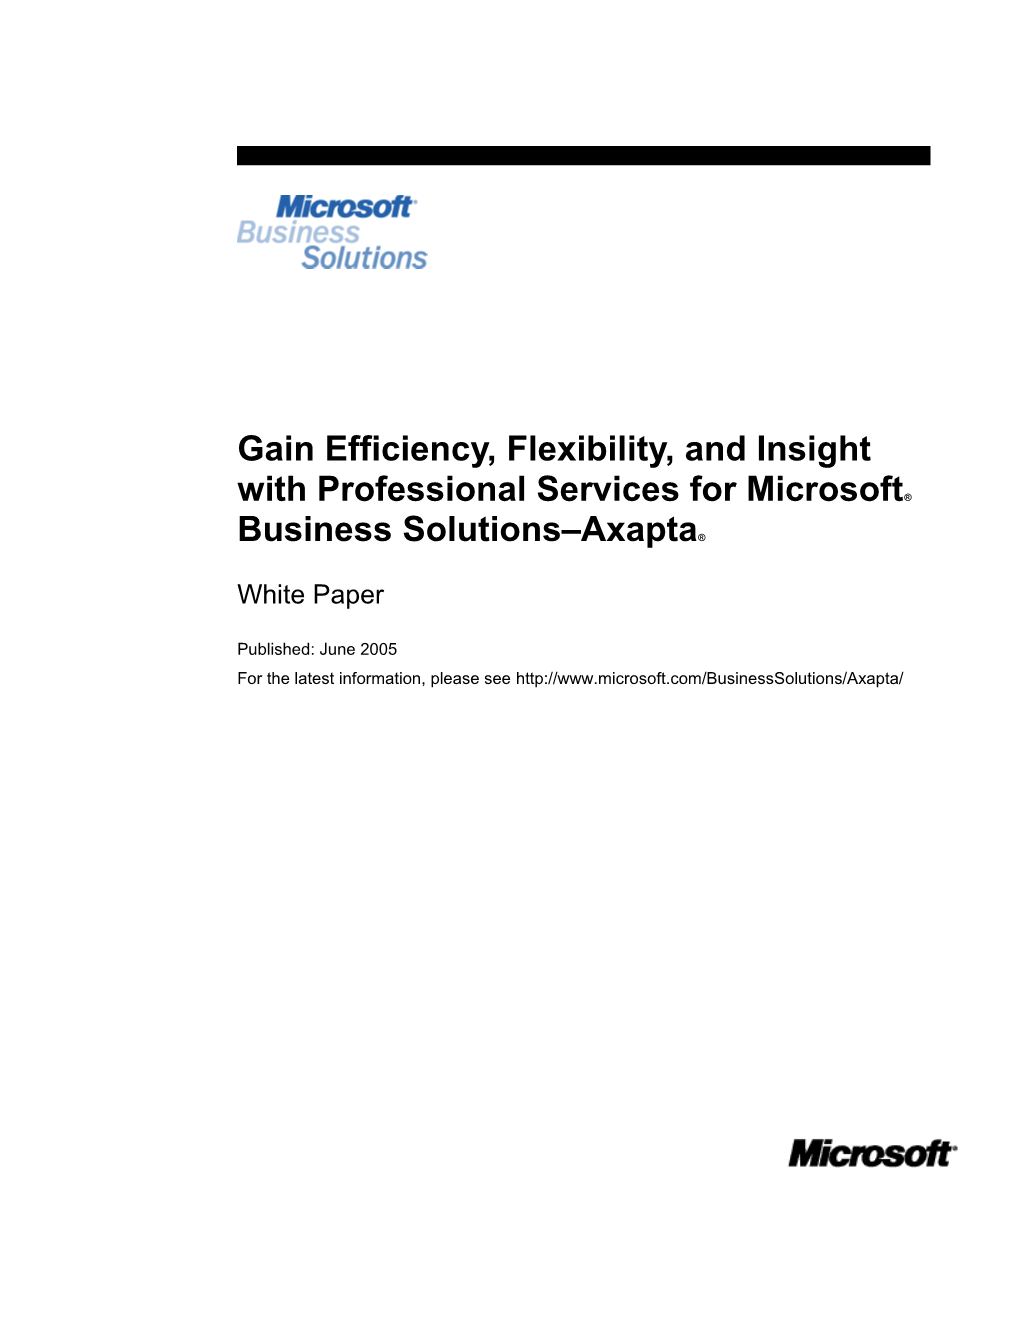 Gain Efficiency, Flexibility, and Insight with Professional Services for Microsoft Business